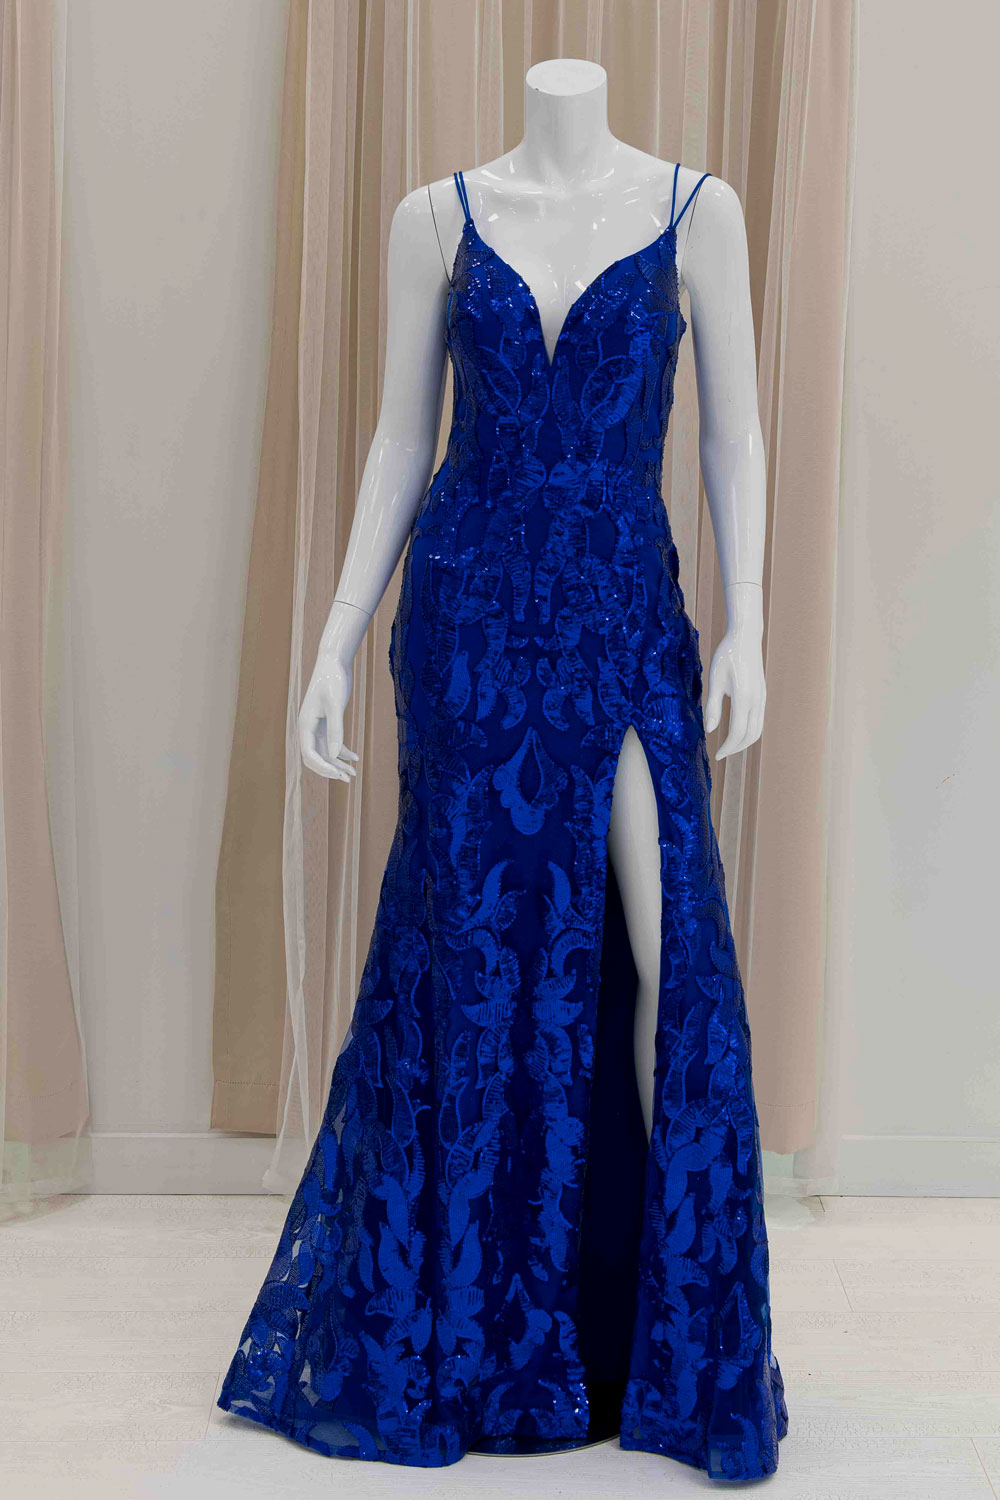 Sequin Form Fitting Evening Gown in Royal Blue